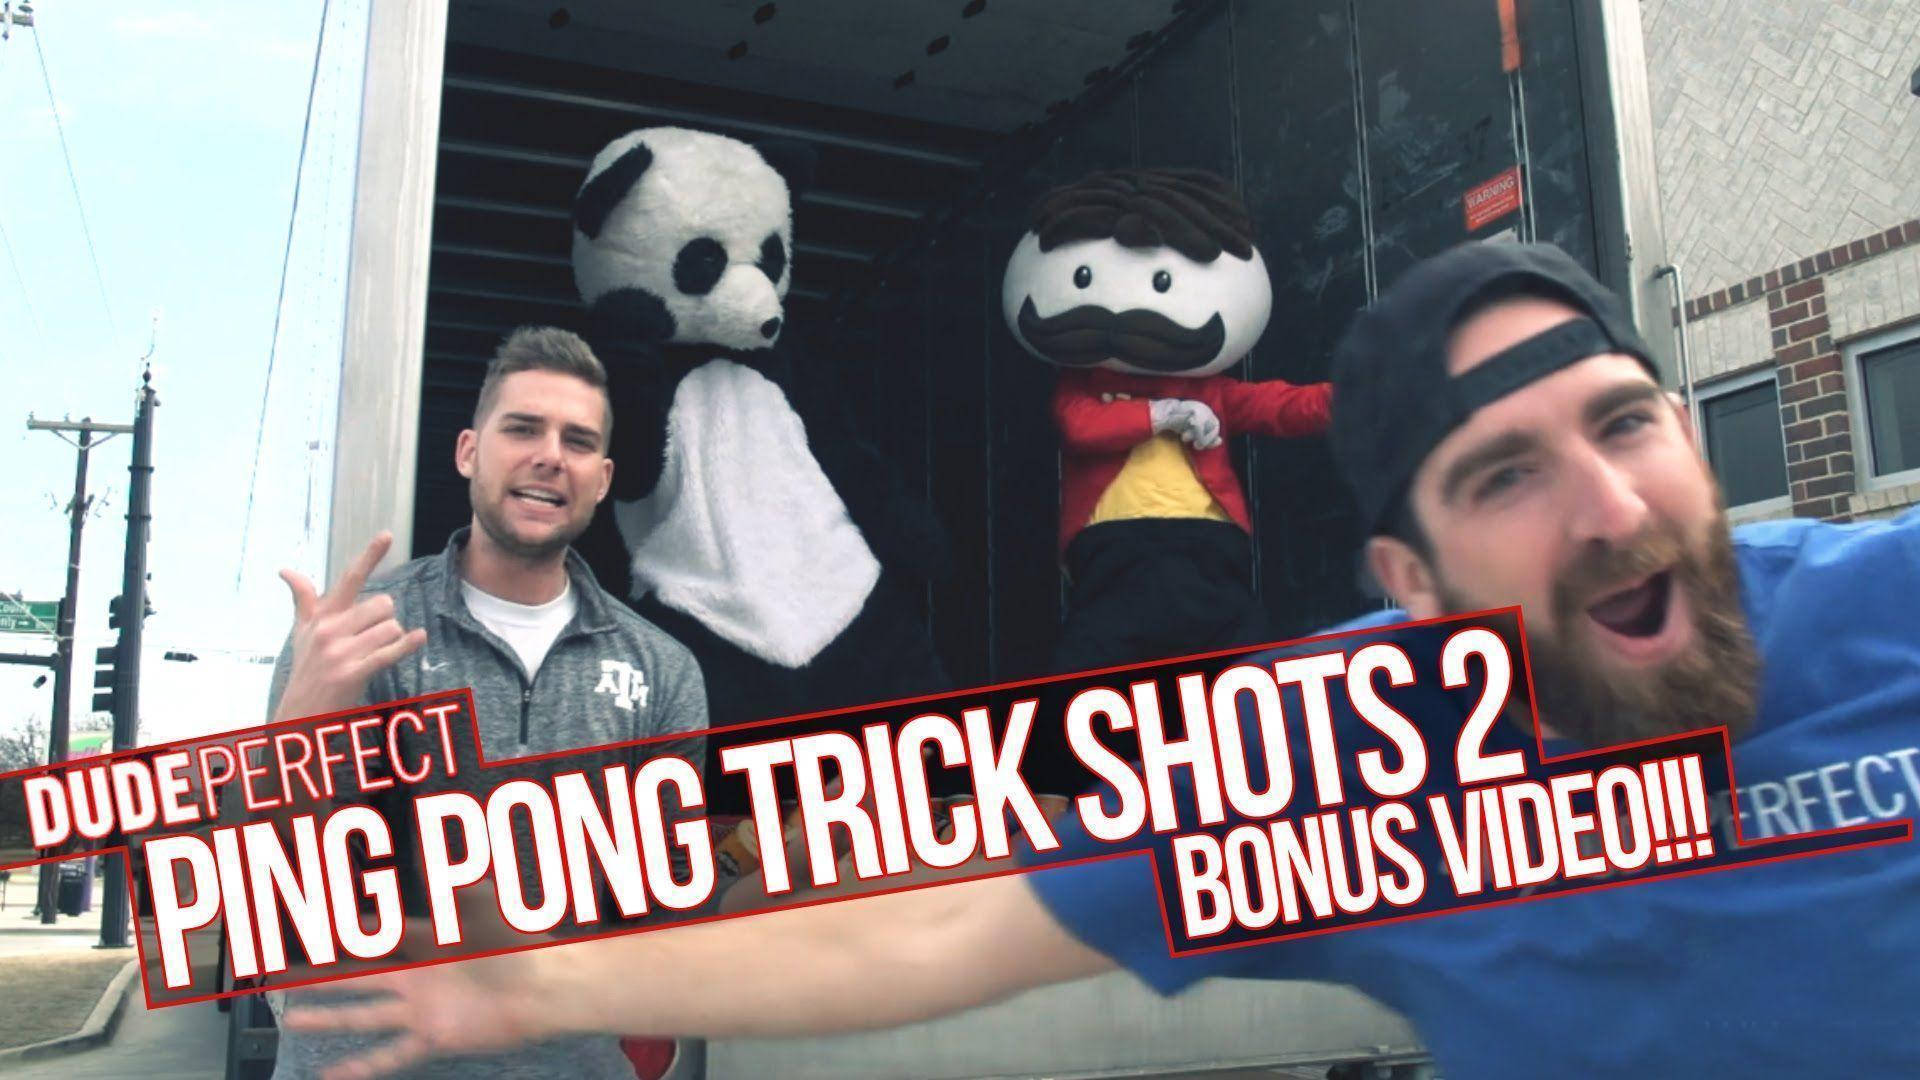 Dude Perfect Ping Pong Trick Shots Background